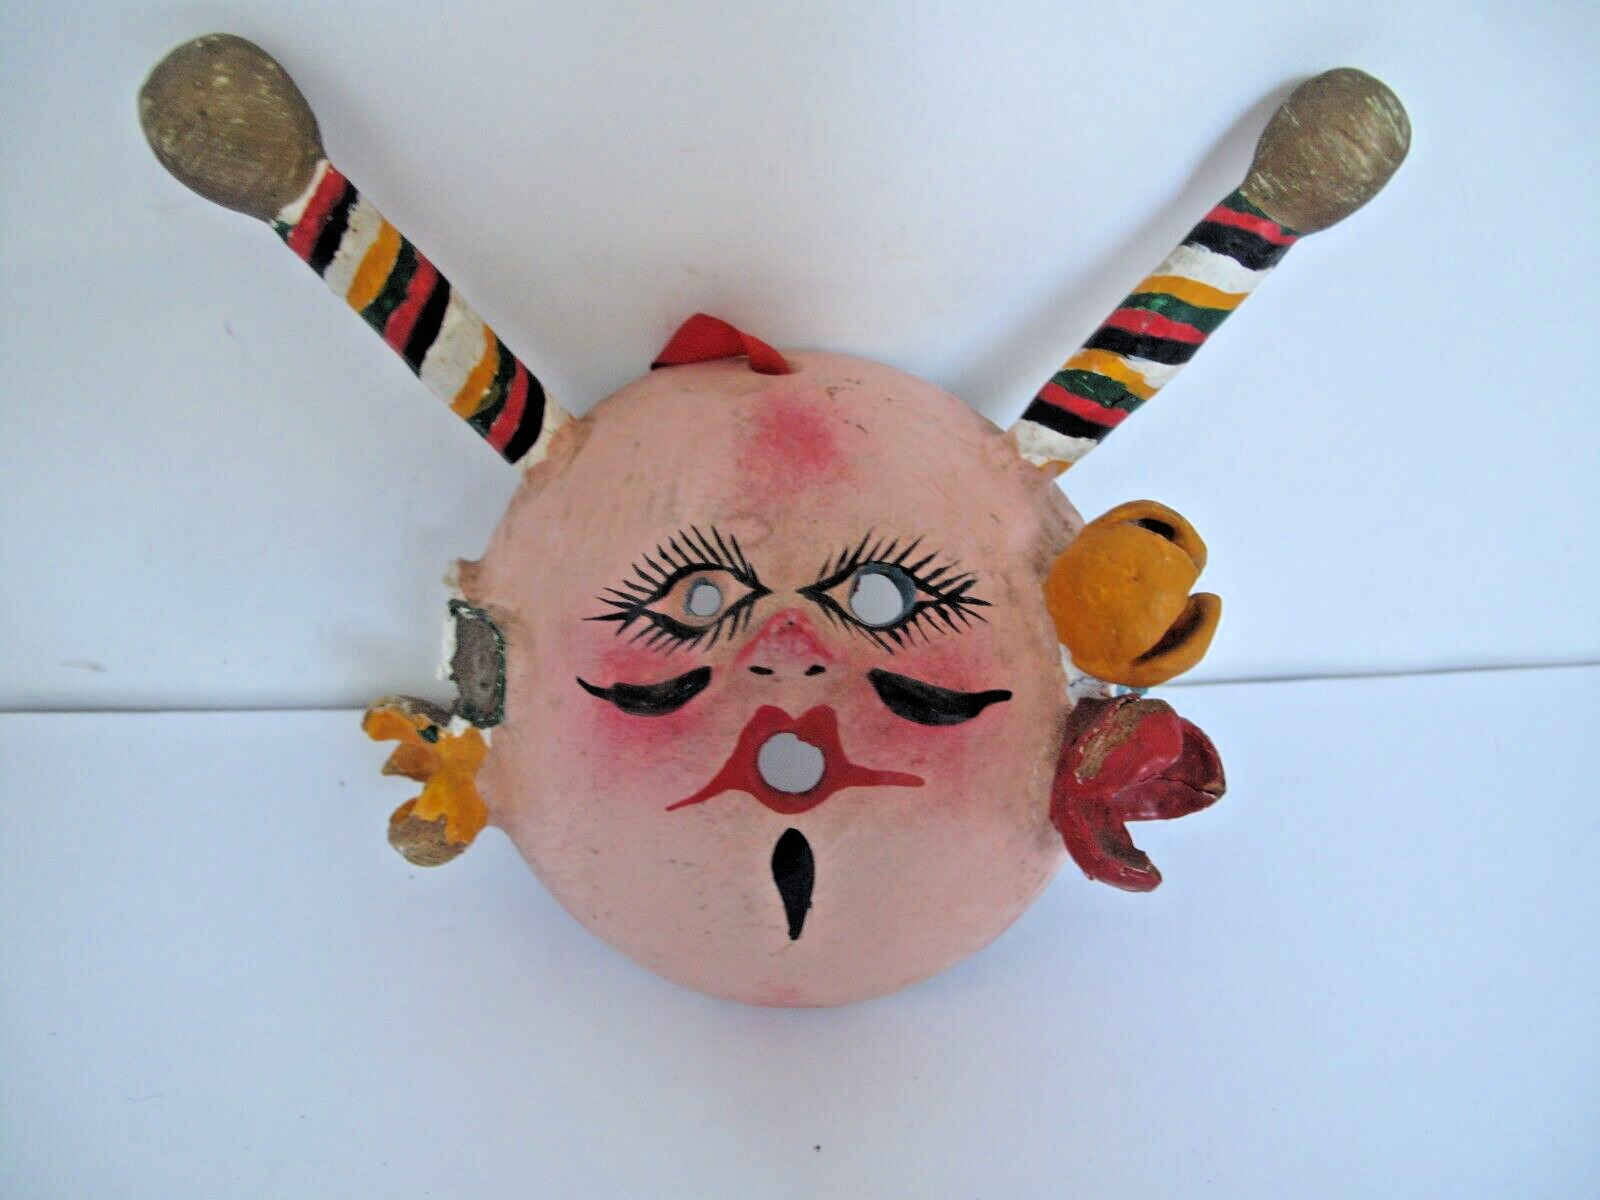 Vintage Mexican Folk Art Coconut Shell Mask Hand Painted Face with Baton's